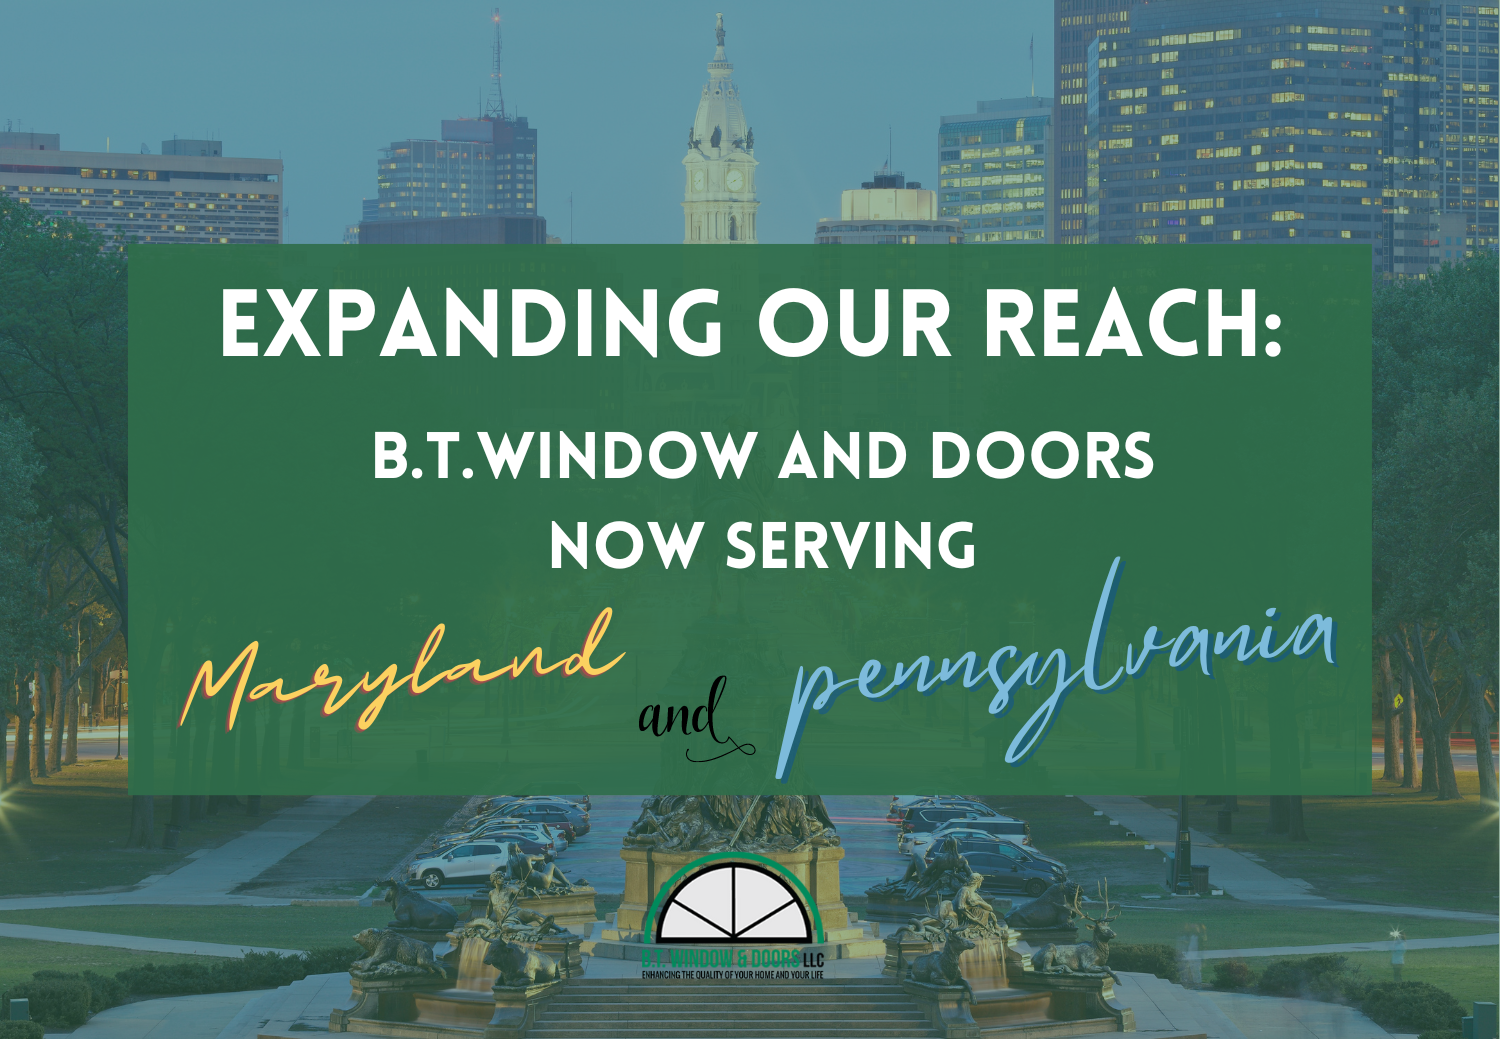 Expanding Our Reach: B.T. Window & Doors Now Serving Maryland and Pennsylvania